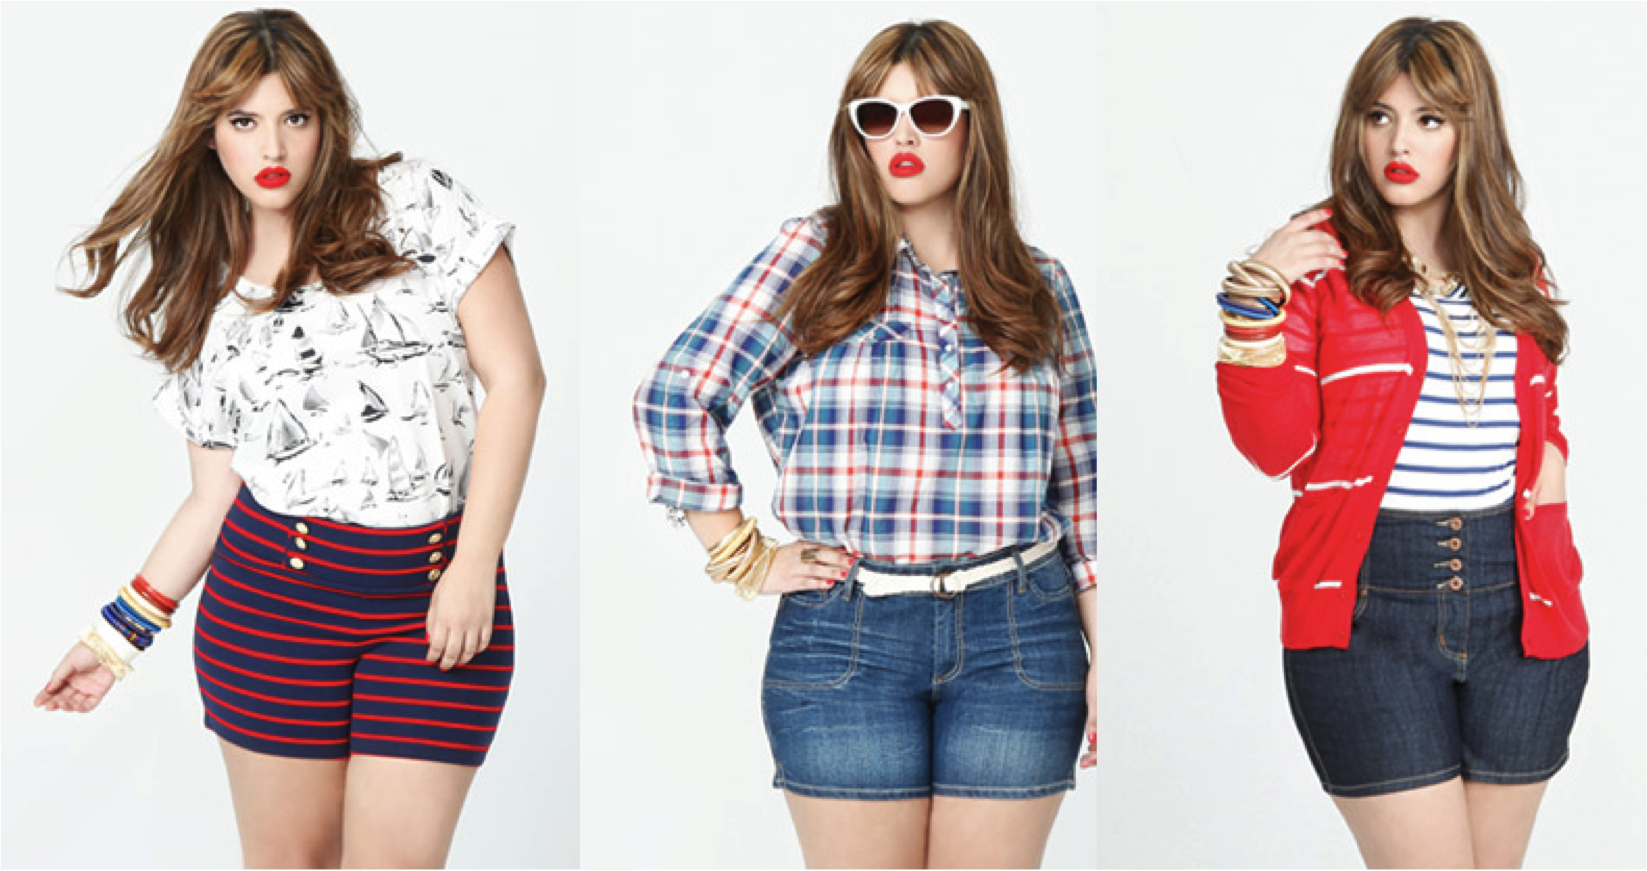 alt="finally, h&m has an online store for United States customers", alt="h&m plus size"